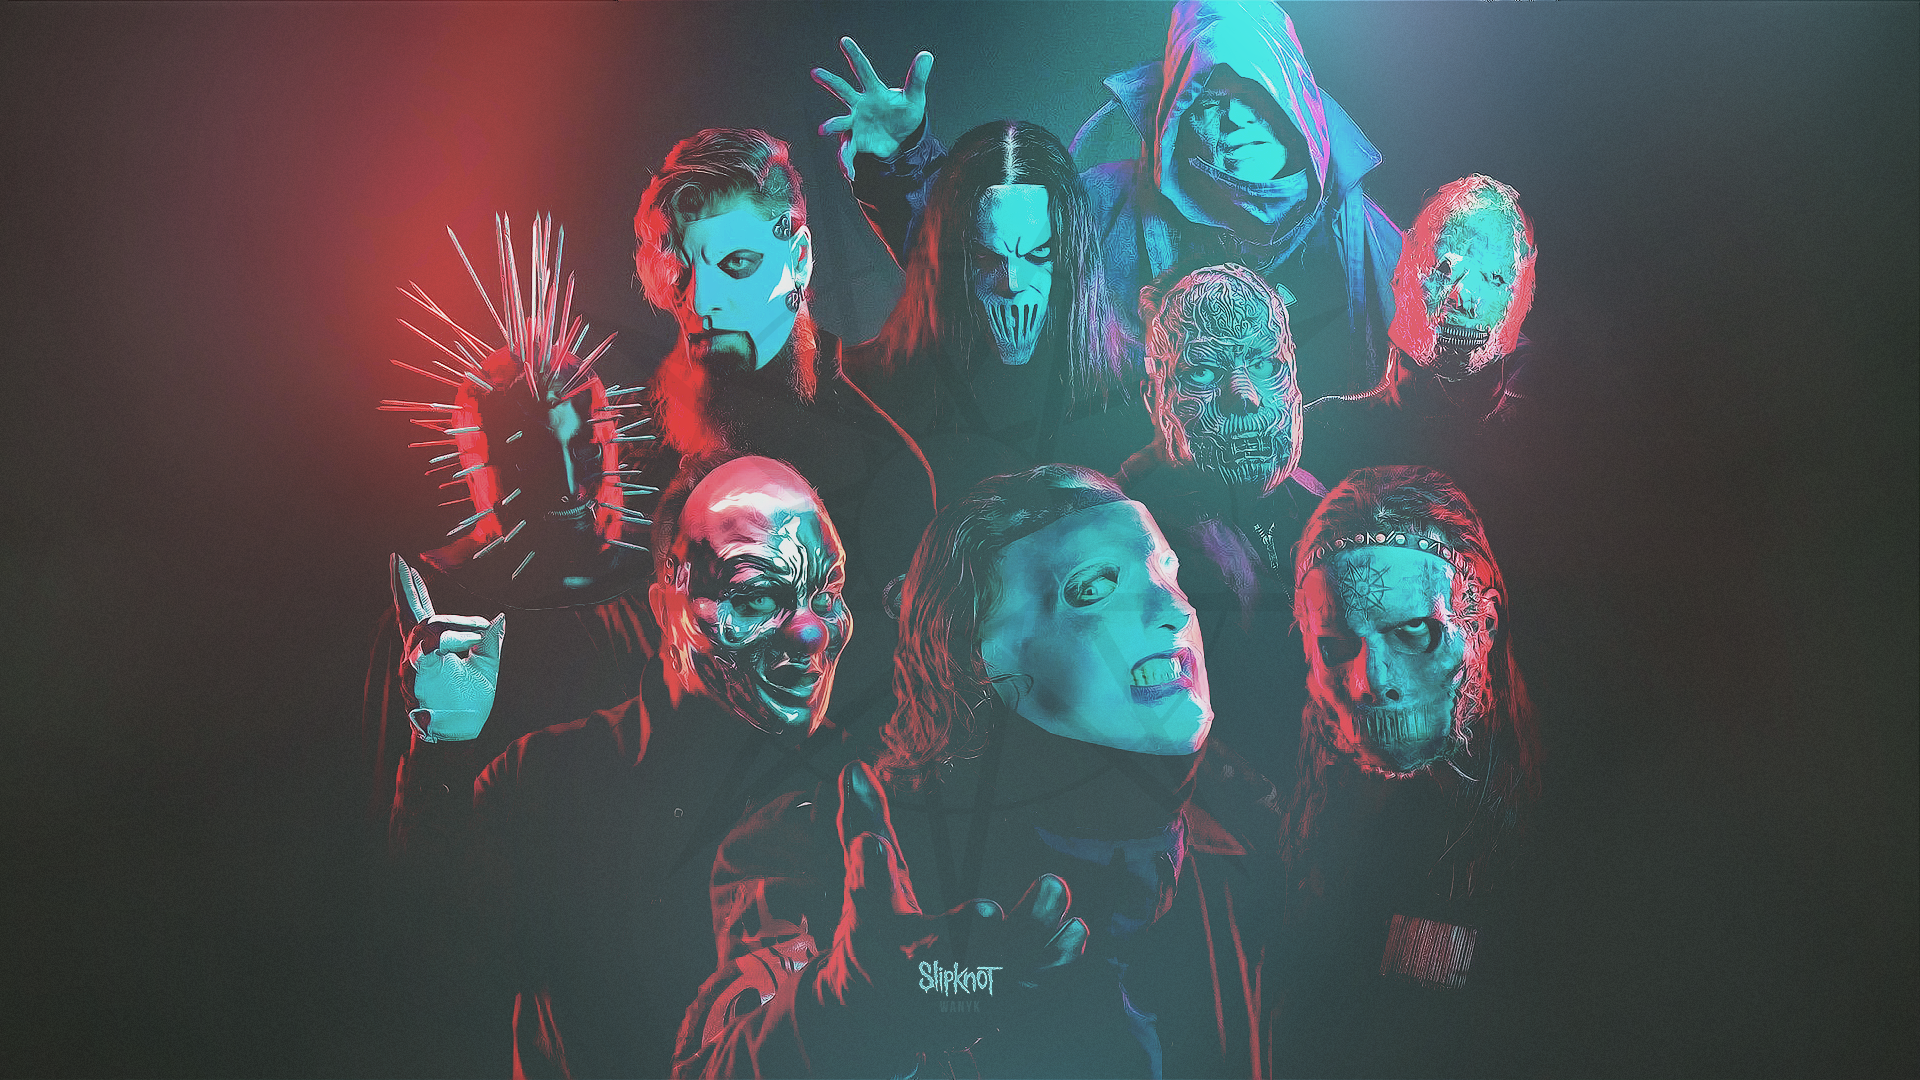 General 1920x1080 Slipknot WANYK We Are Not Your Kind 2019 (year) red cyan dark mask band music